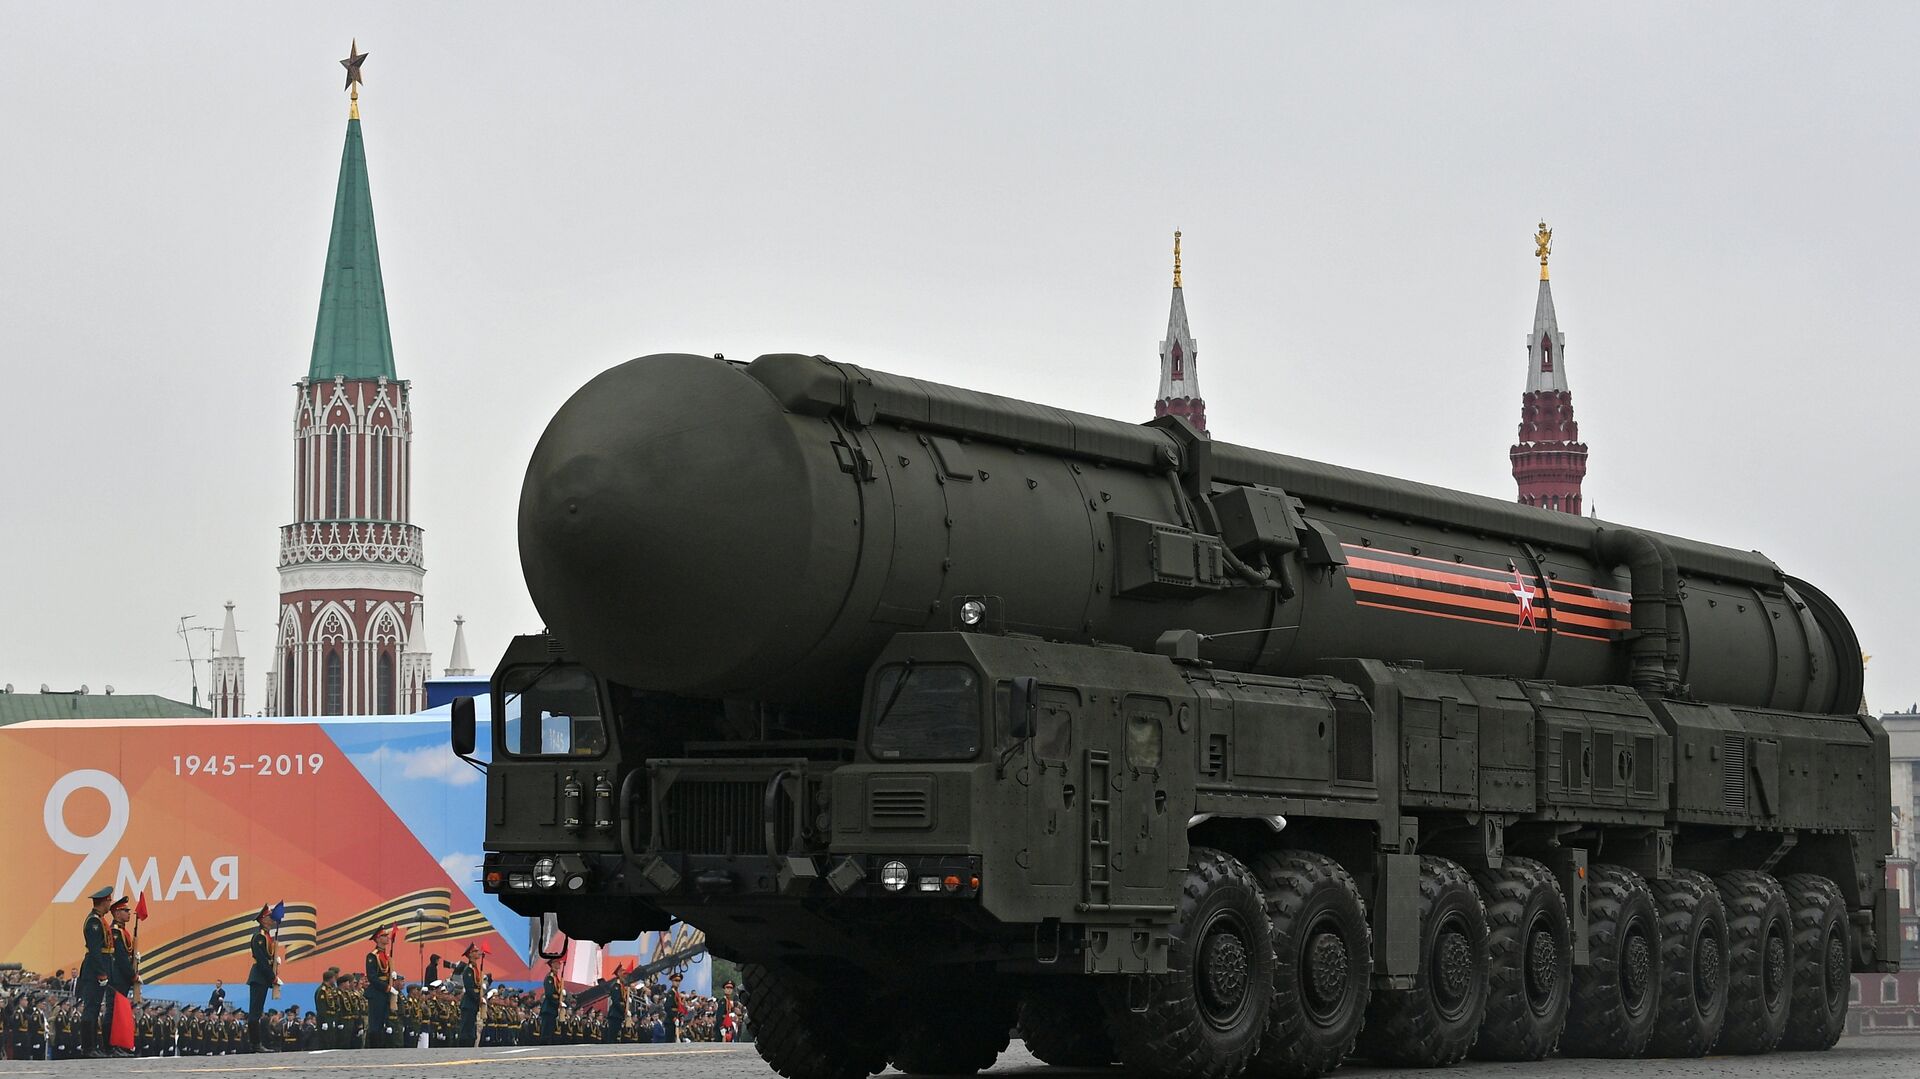 A Russian RS-24 Yars intercontinental ballistic missile system rolls down the Red Square during the Victory Day parade in Moscow on 9 May, 2019 - Sputnik International, 1920, 30.03.2023